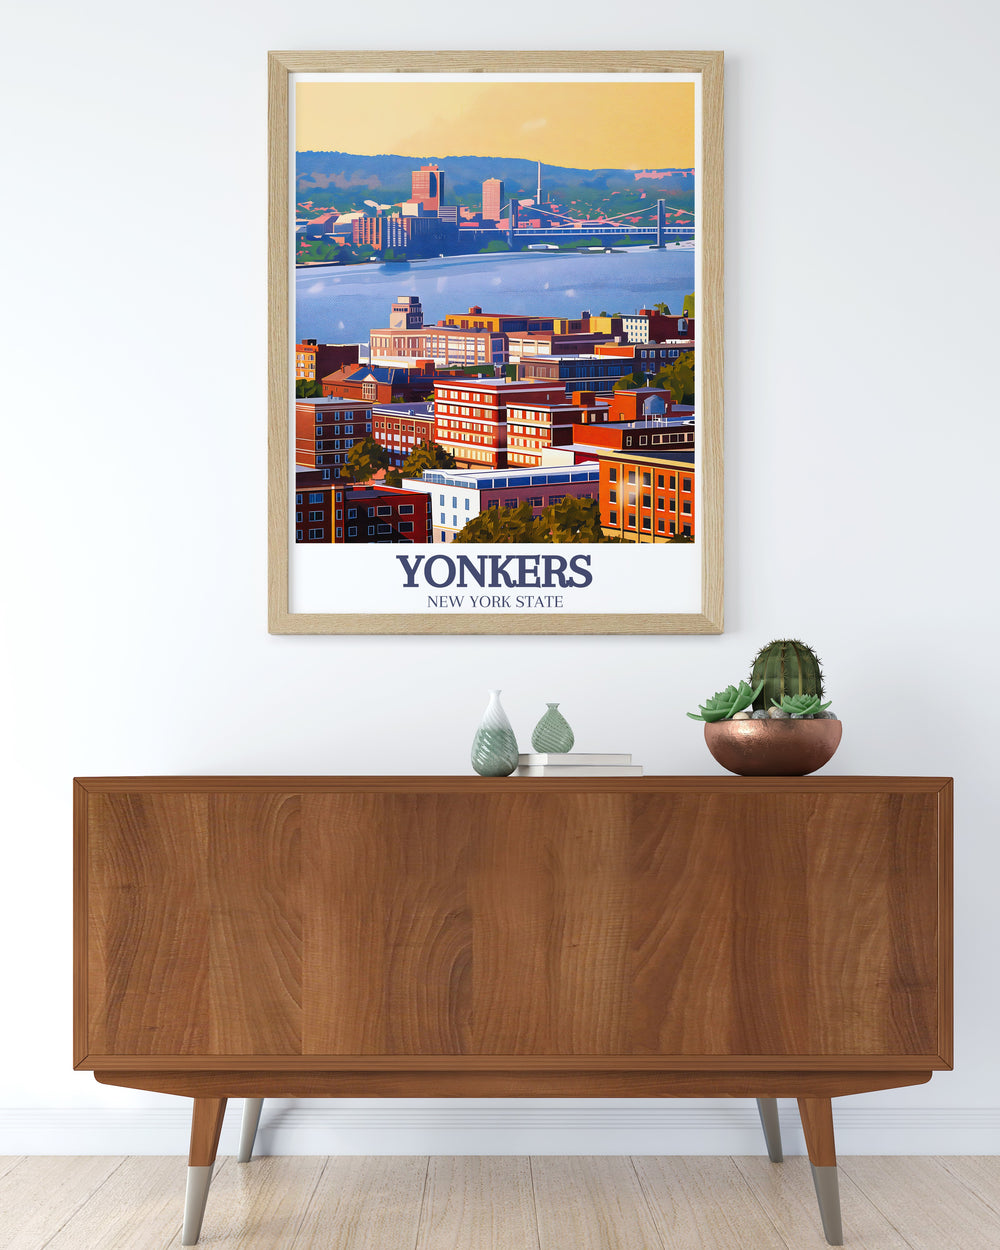 Elegant Yonkers wall art showcasing Hudson River Downtown in stunning prints great for living room decor and making memorable gifts for anniversaries birthdays and Christmas